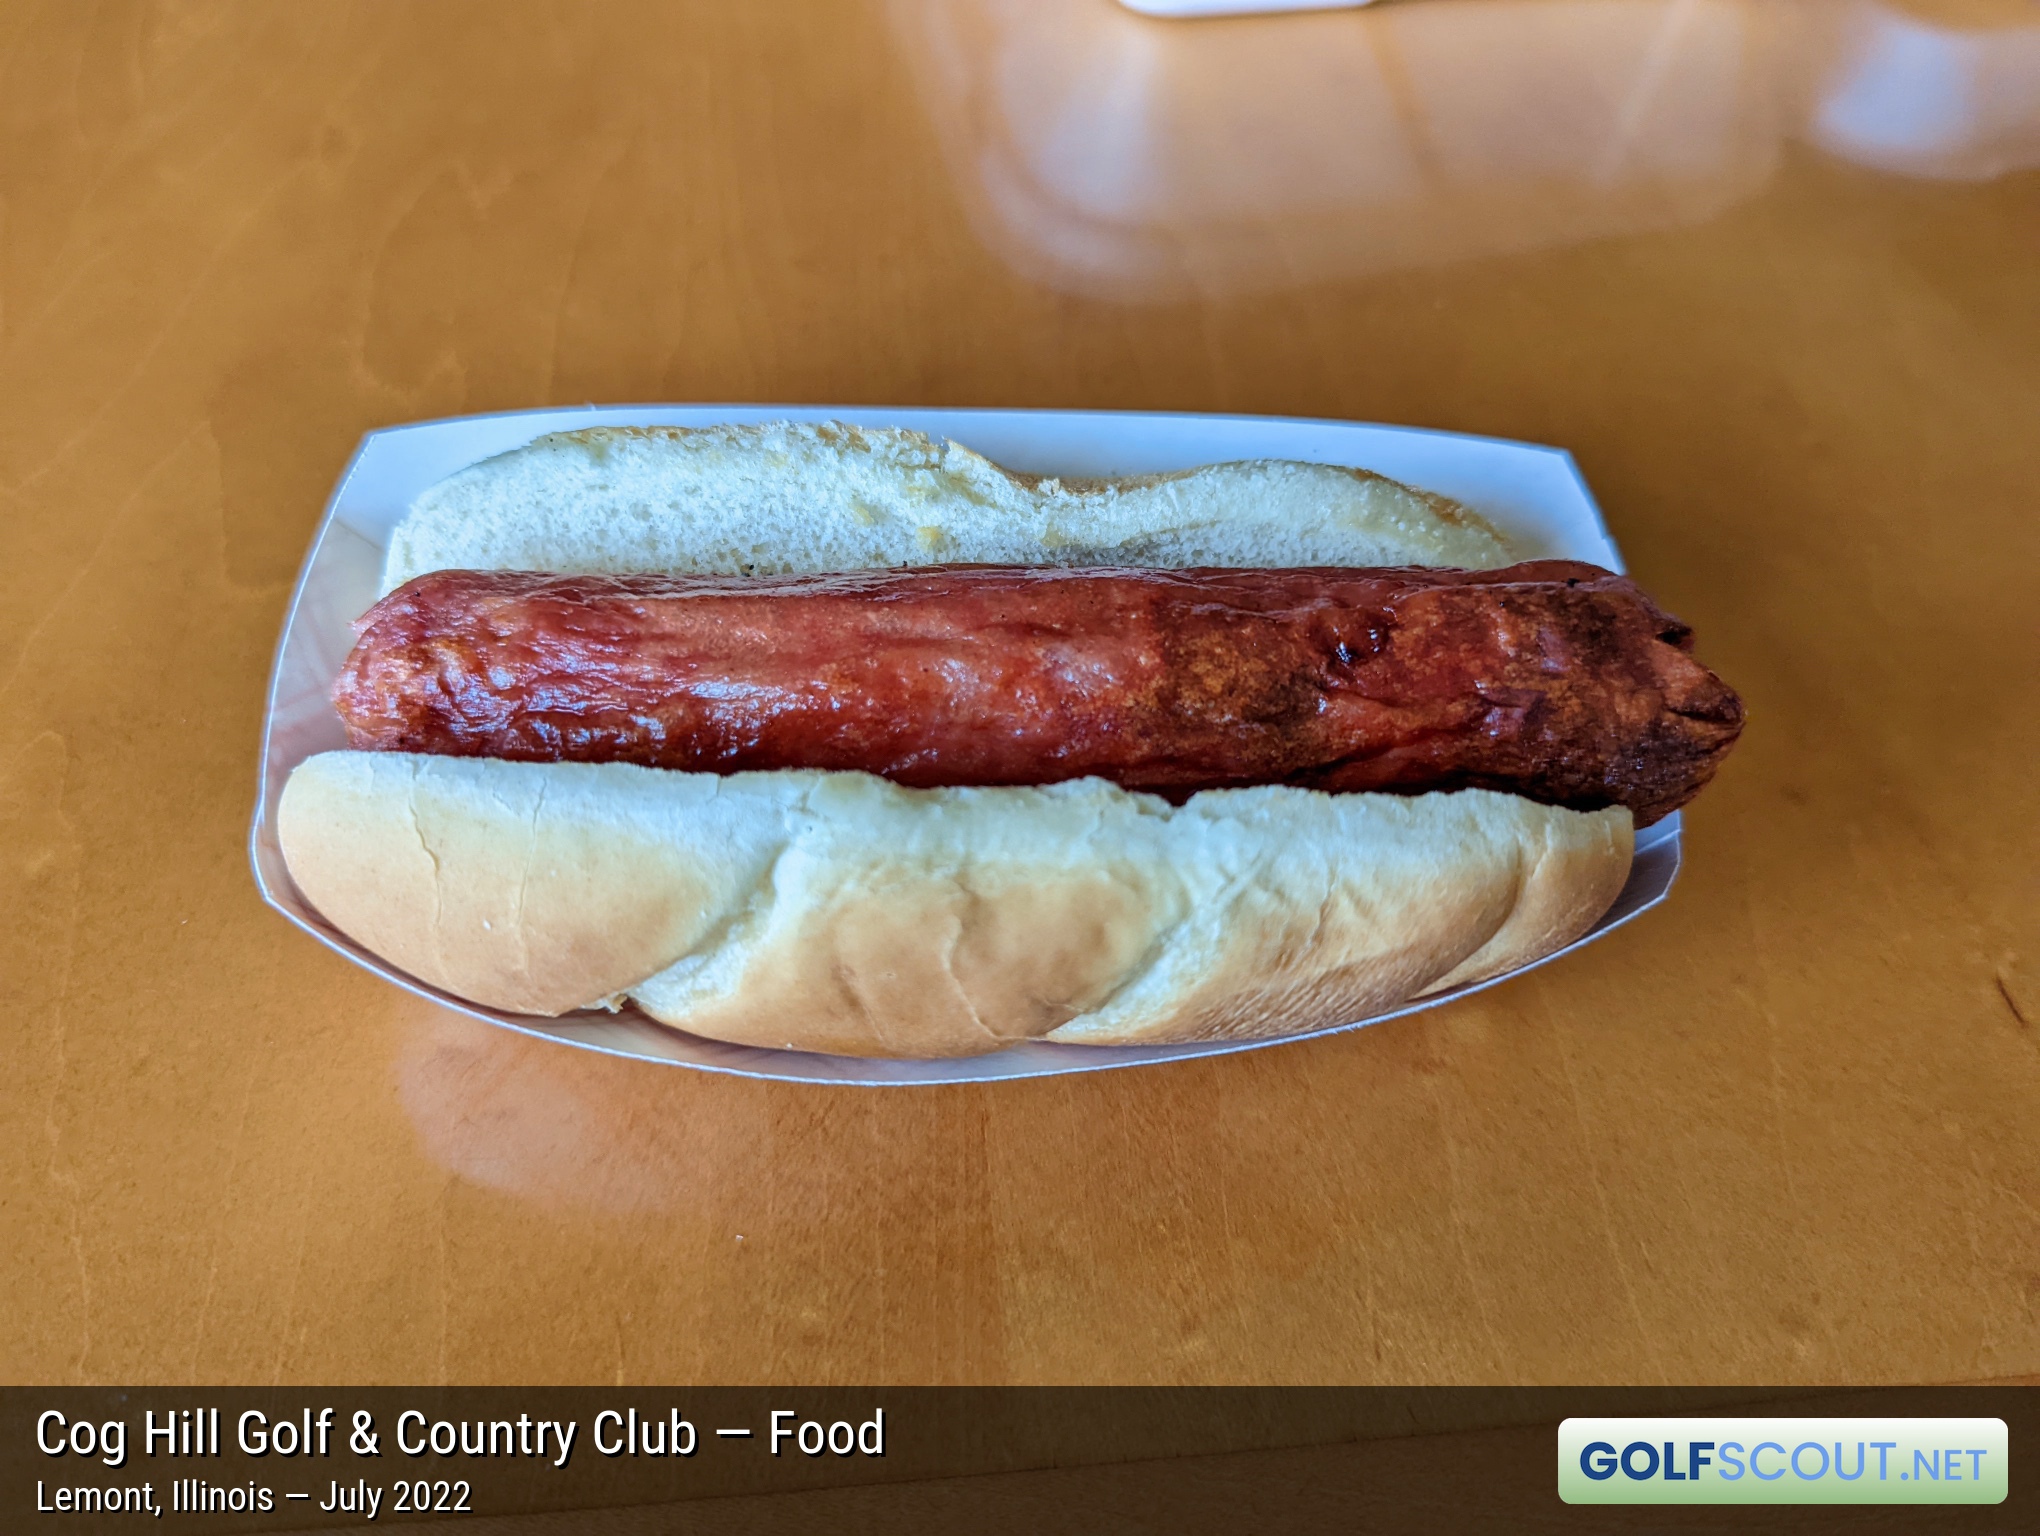 Photo of the food and dining at Cog Hill Course #3 in Lemont, Illinois. Hot dog from Cog Hill. My quest to try a hot dog at every course in the Chicagoland area continues.